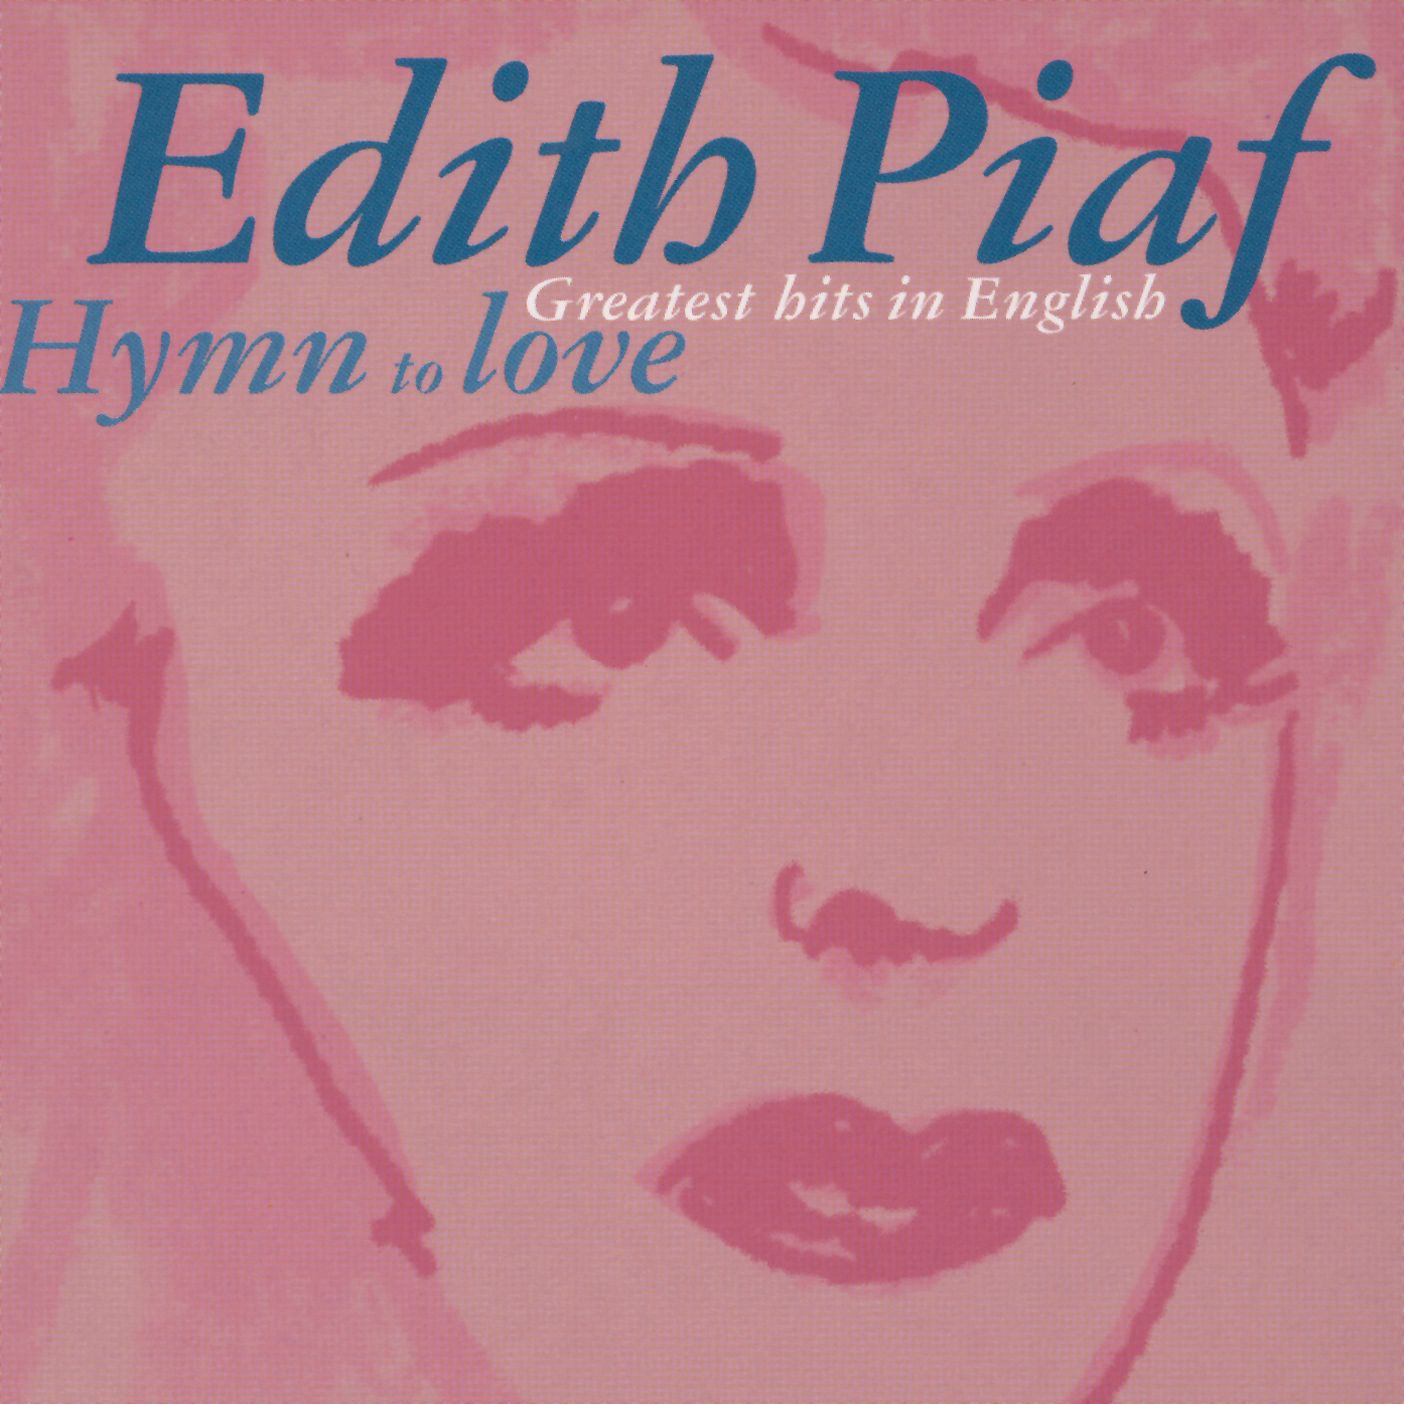 É dith Piaf: Hymn to Love  Greatest Hits In English